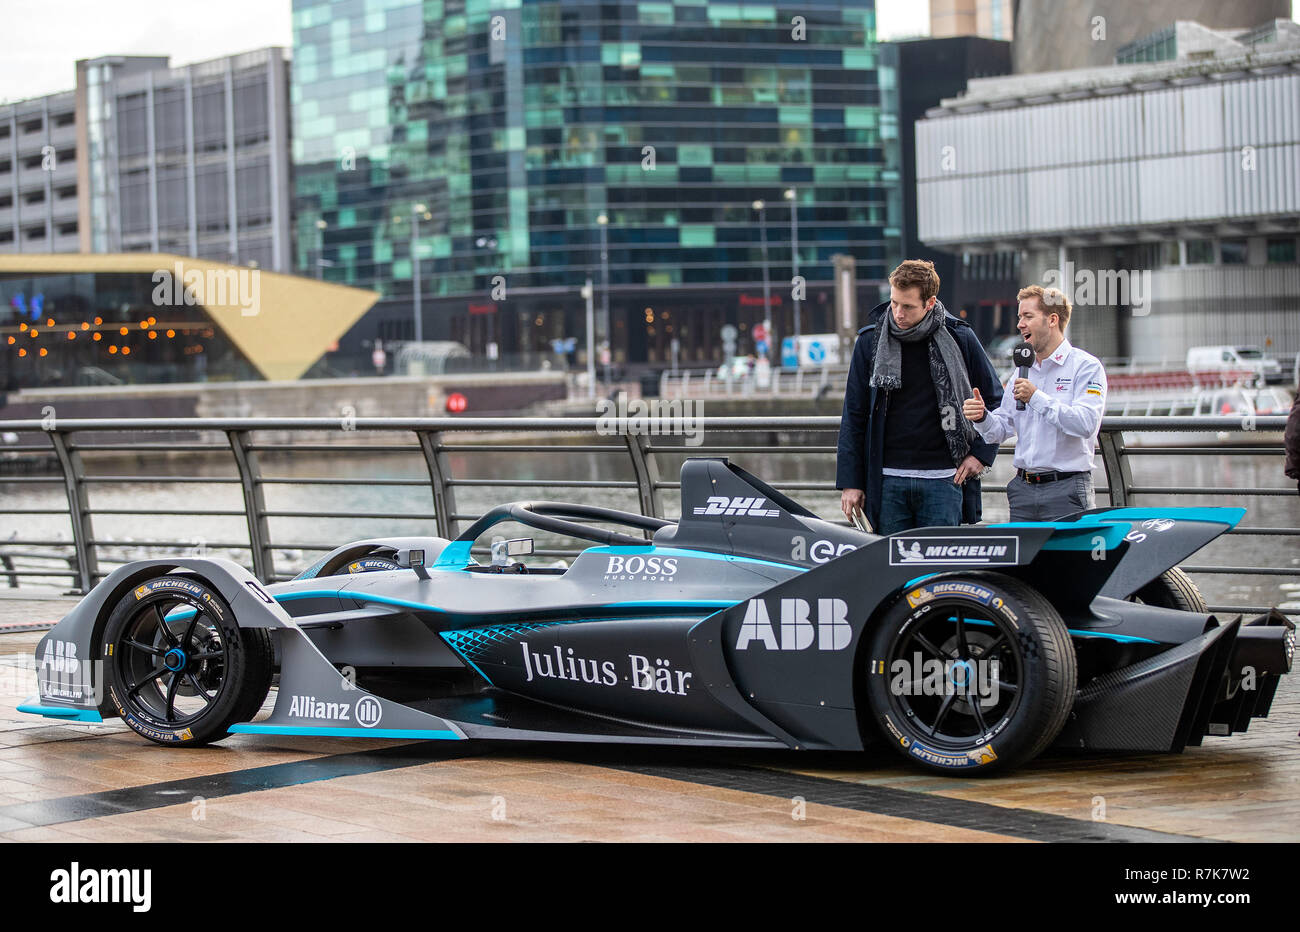 Formula E driver for Envision Virgin Racing, Sam Bird visits BBC Studios to promote the opening race of the new Formula E season on BBC Red Button this Saturday at 12pm